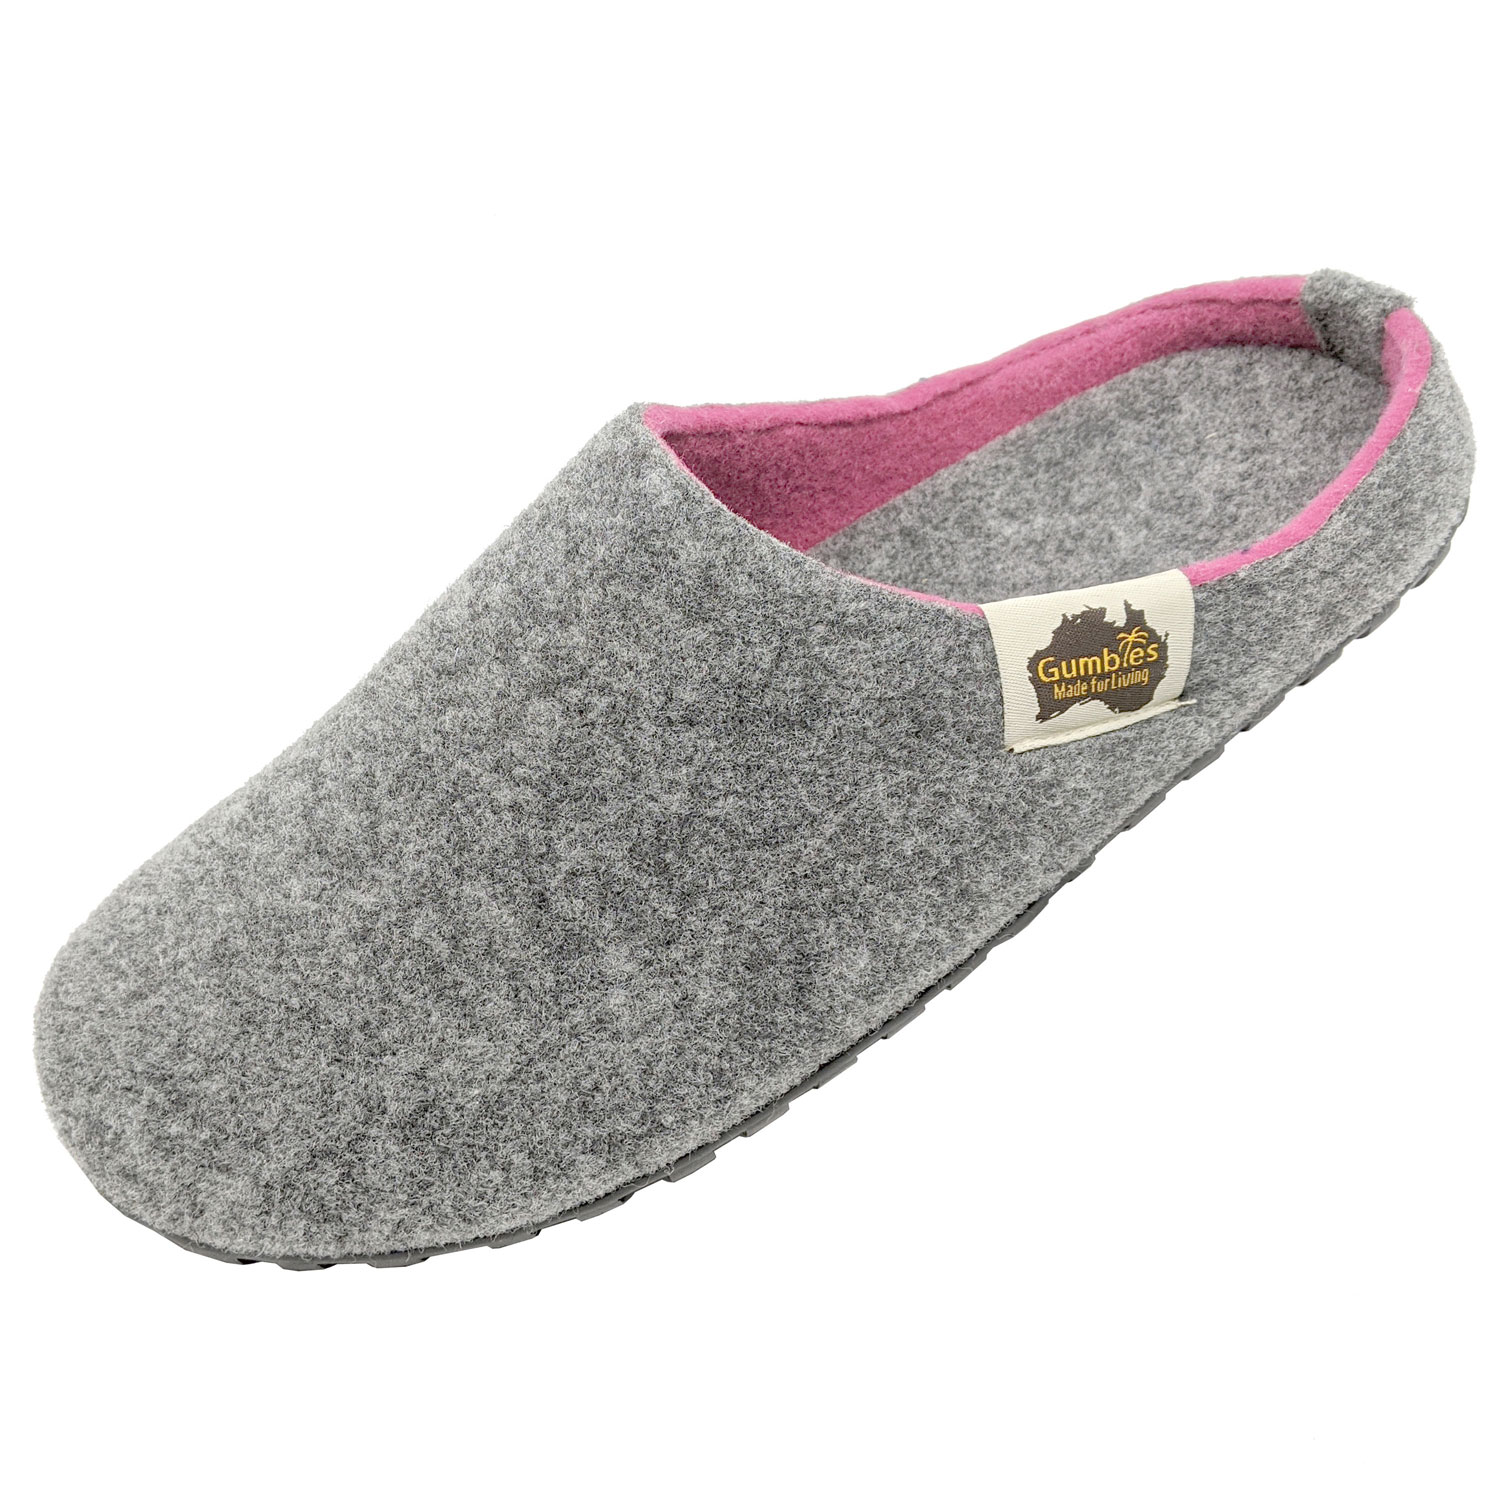 GUMBIES – Outback Slipper, Grey Pink 